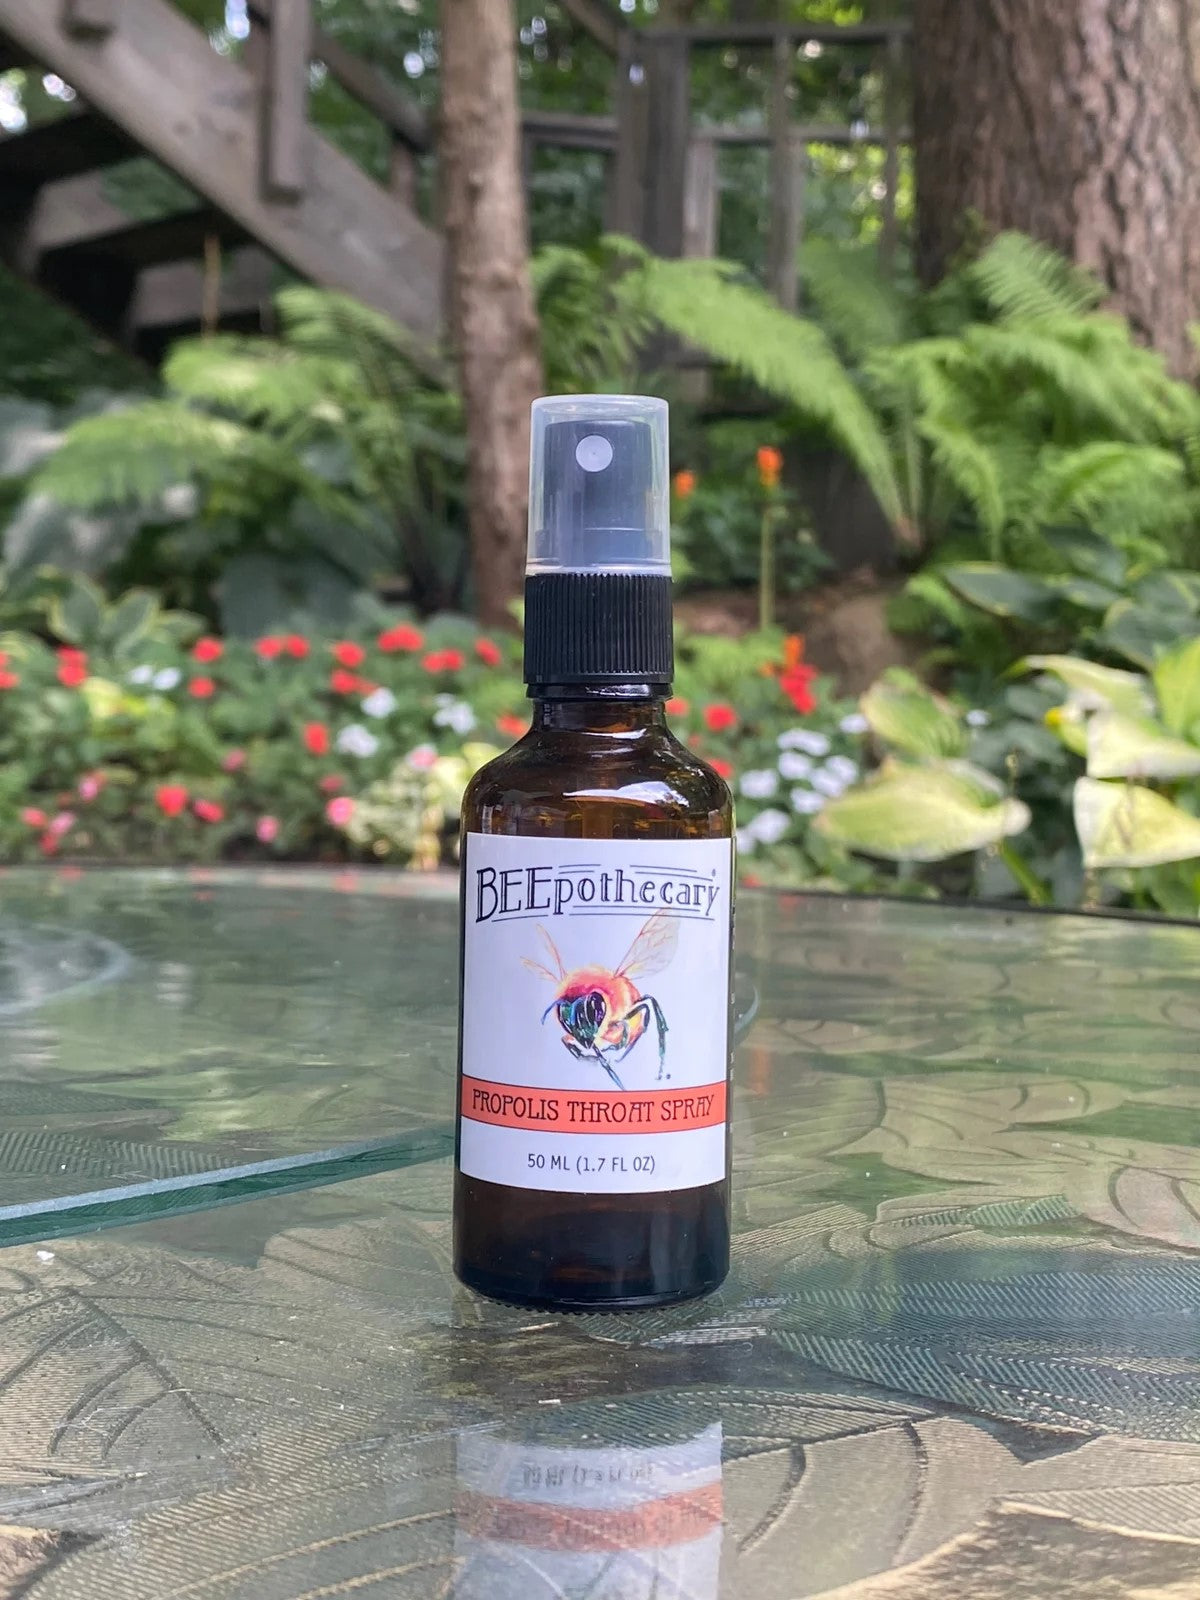 BEEpothecary Propolis Throat Spray in 50 ml brown spray bottle with white label.